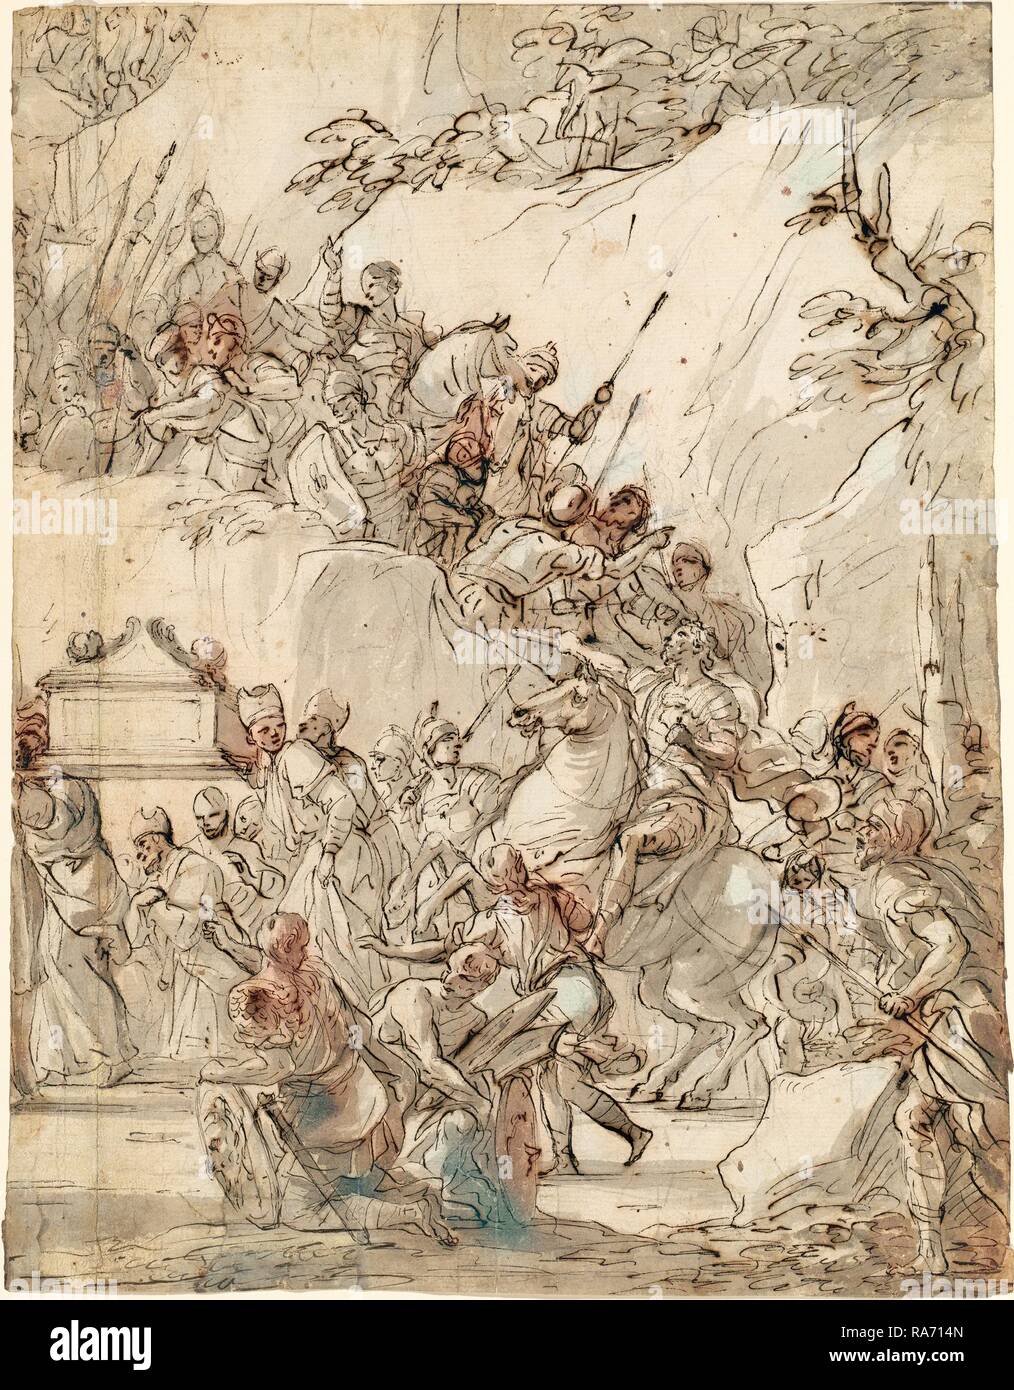 Nicola Malinconico, Italian (1663-1721), The Transport of the Ark of the Covenant, late 1680s, pen and brown ink with reimagined Stock Photo